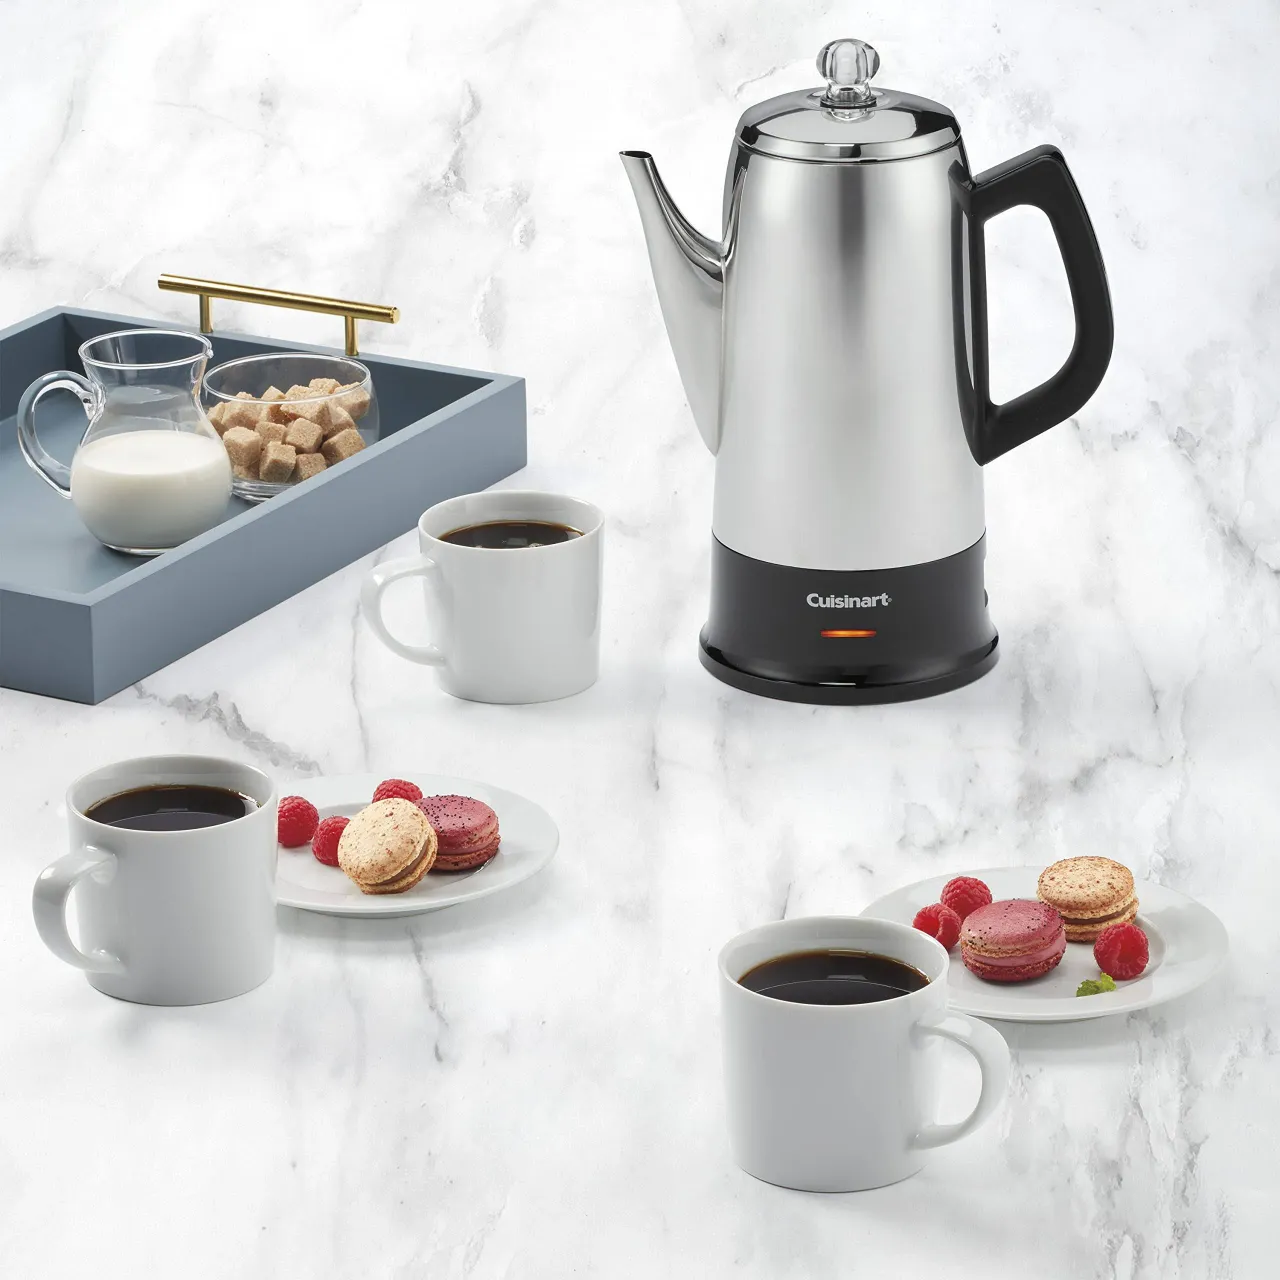 5 Classic Stainless-Steel Percolator by Cuisinart, with a 12-Cup Capacity and a sleek Black/Stainless Finish.